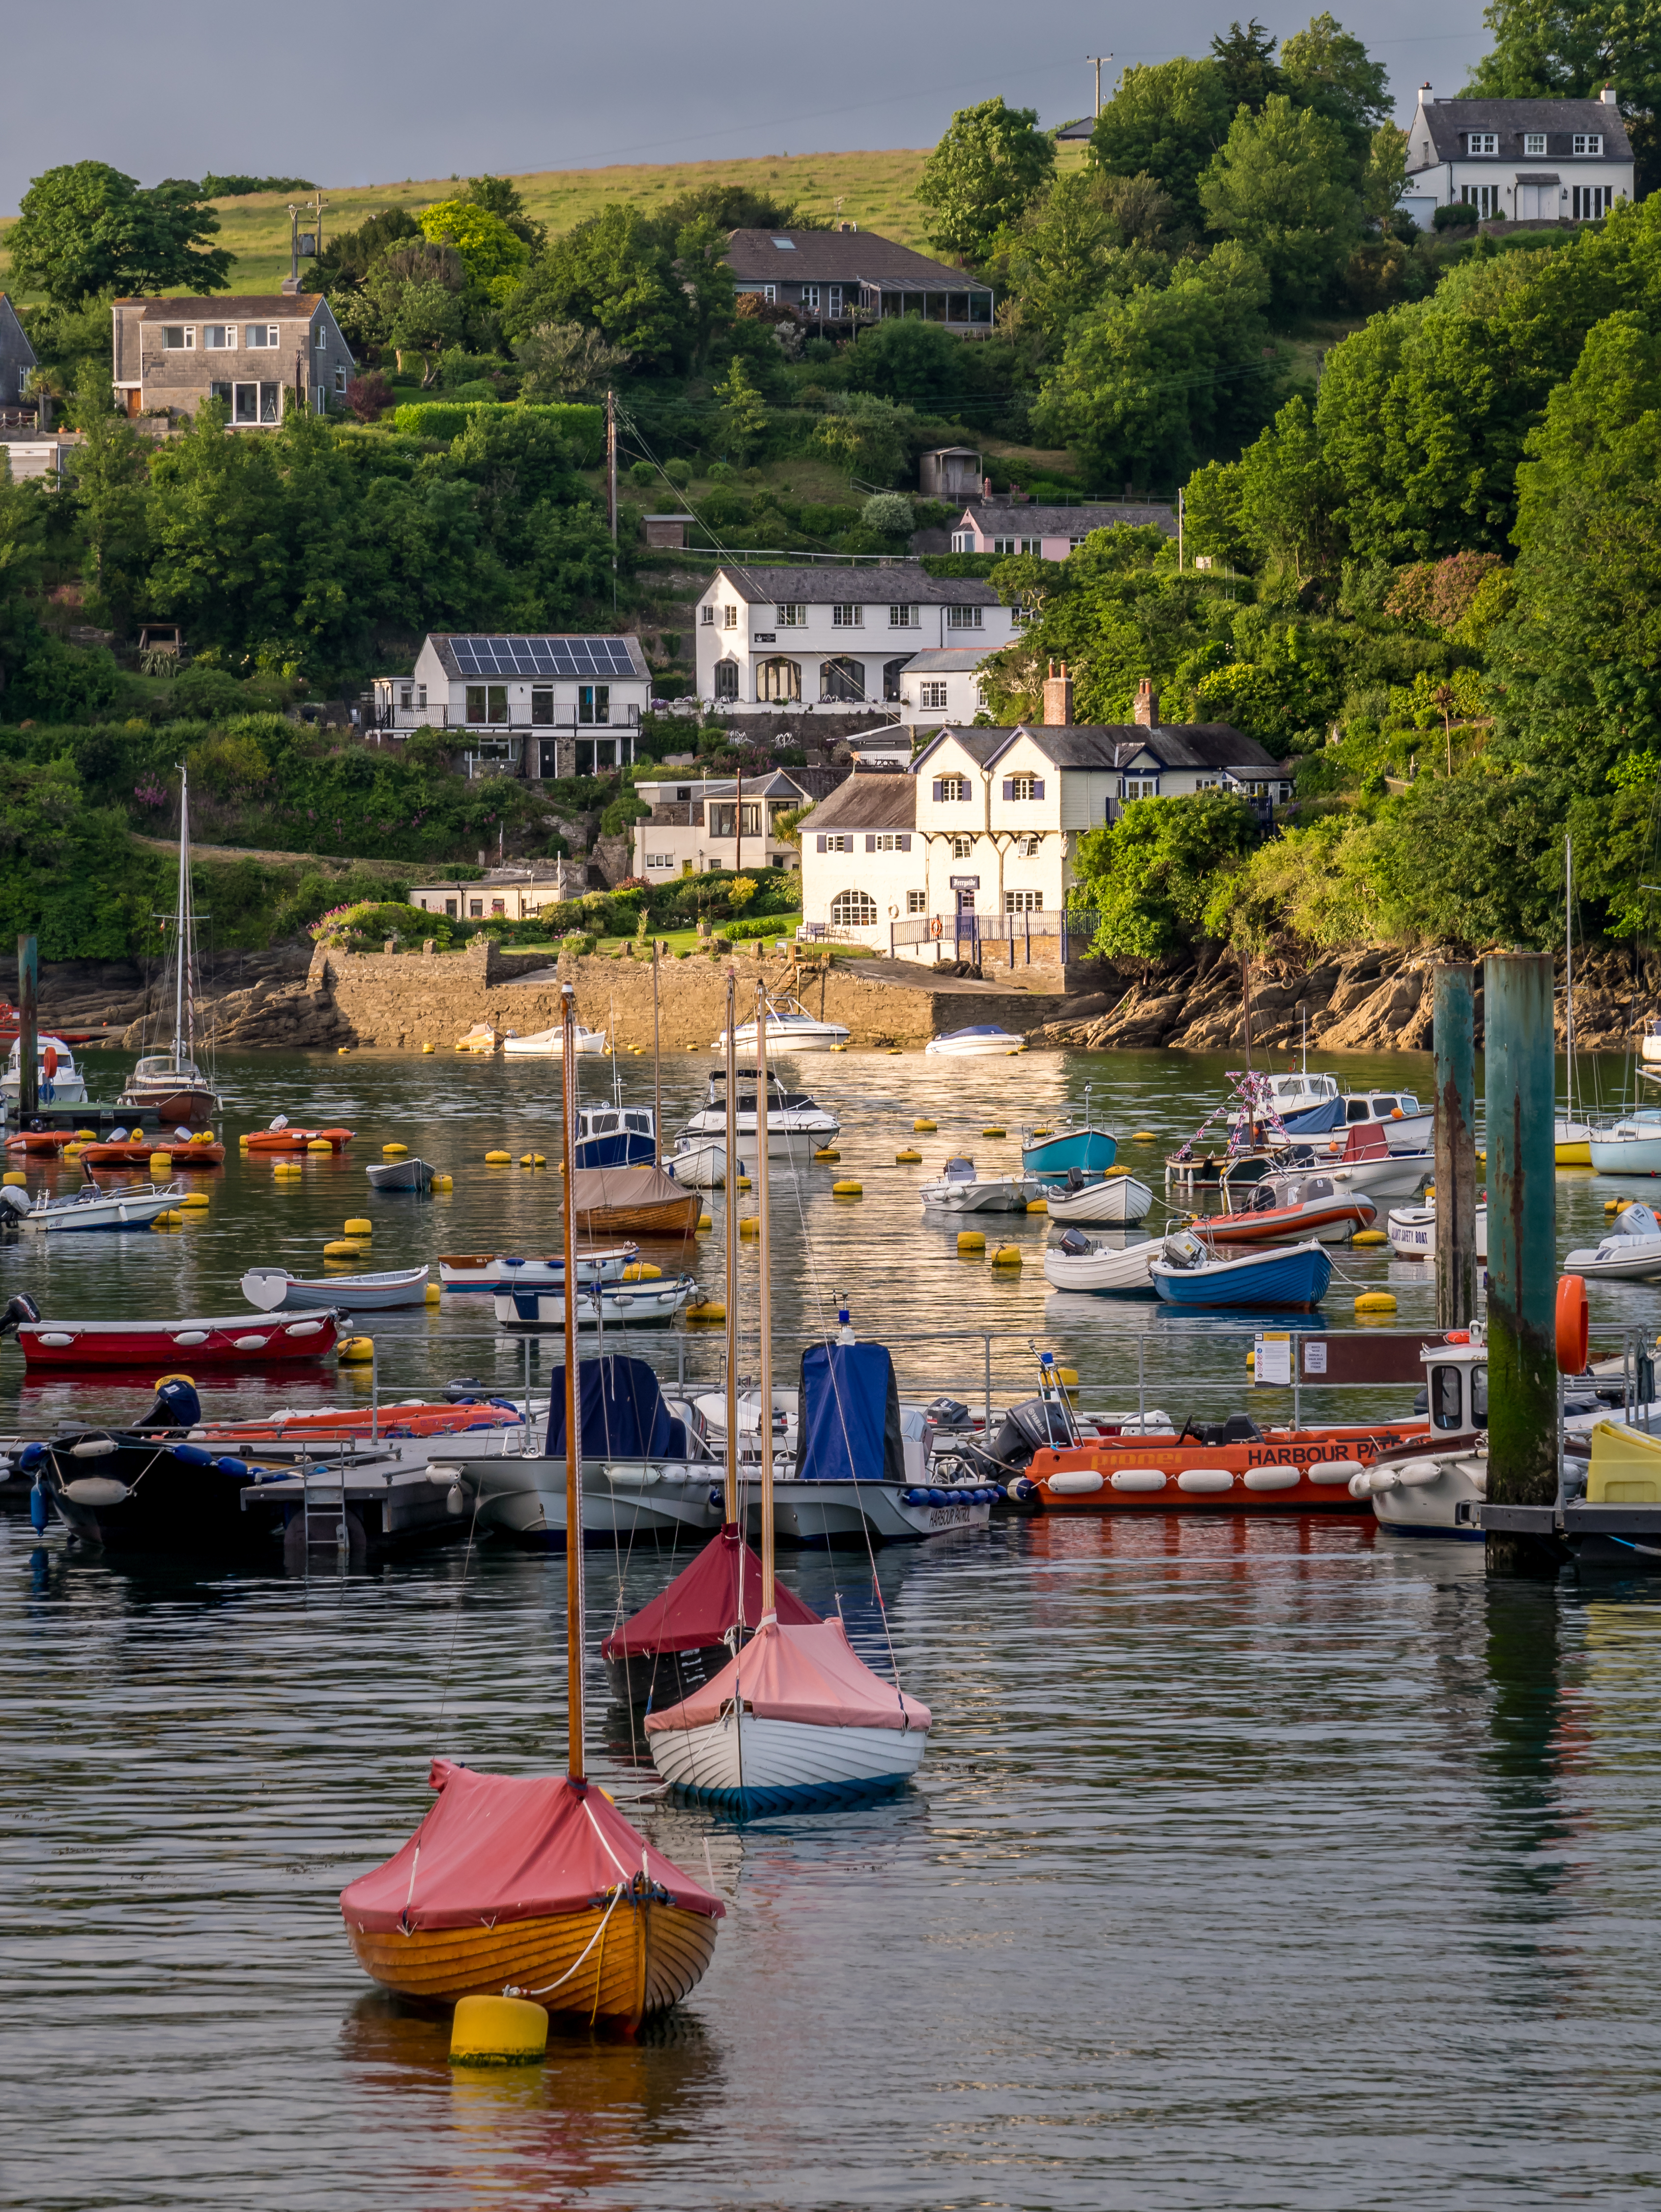 android miscellaneous, water, boats, building, miscellanea, hill